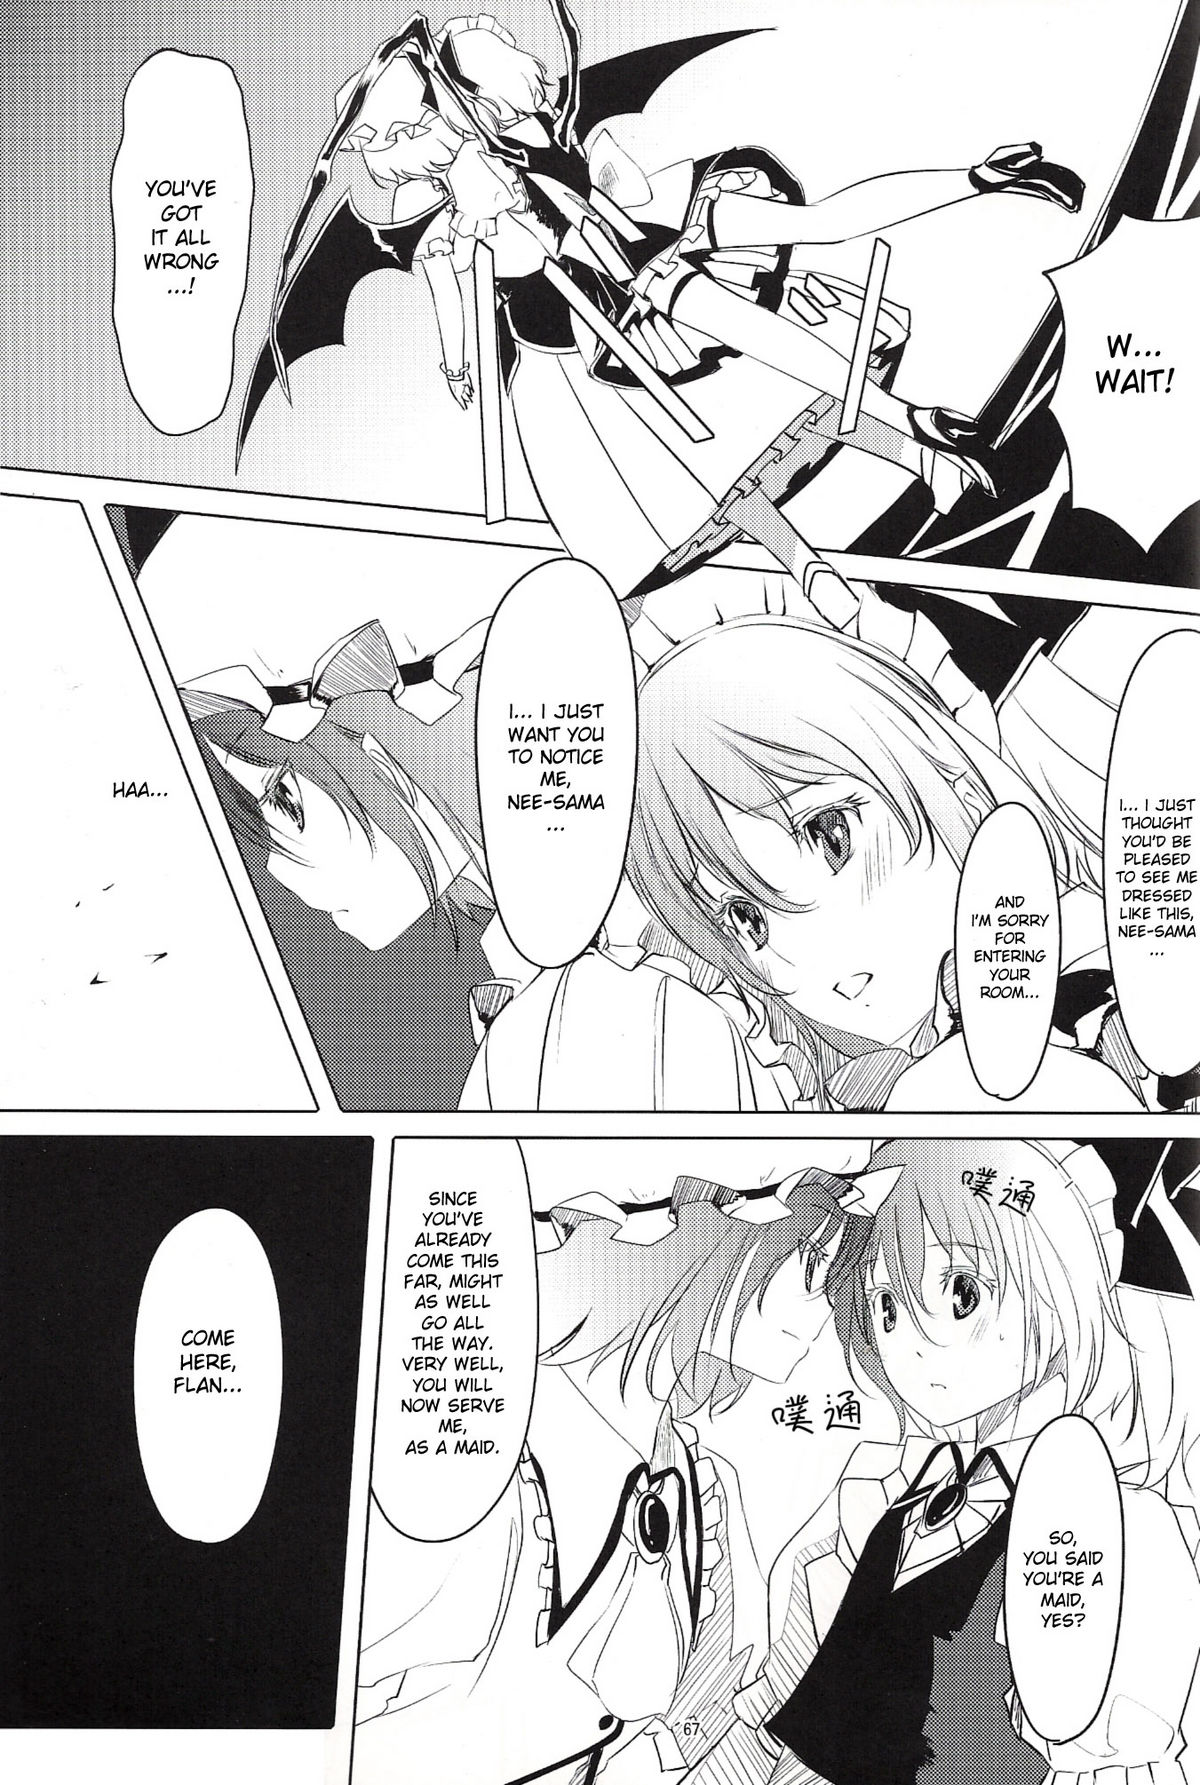 [telomereNA (Gustav)] S-2:Scarlet Sisters (Touhou Project) [English] [desudesu] [Incomplete] page 6 full